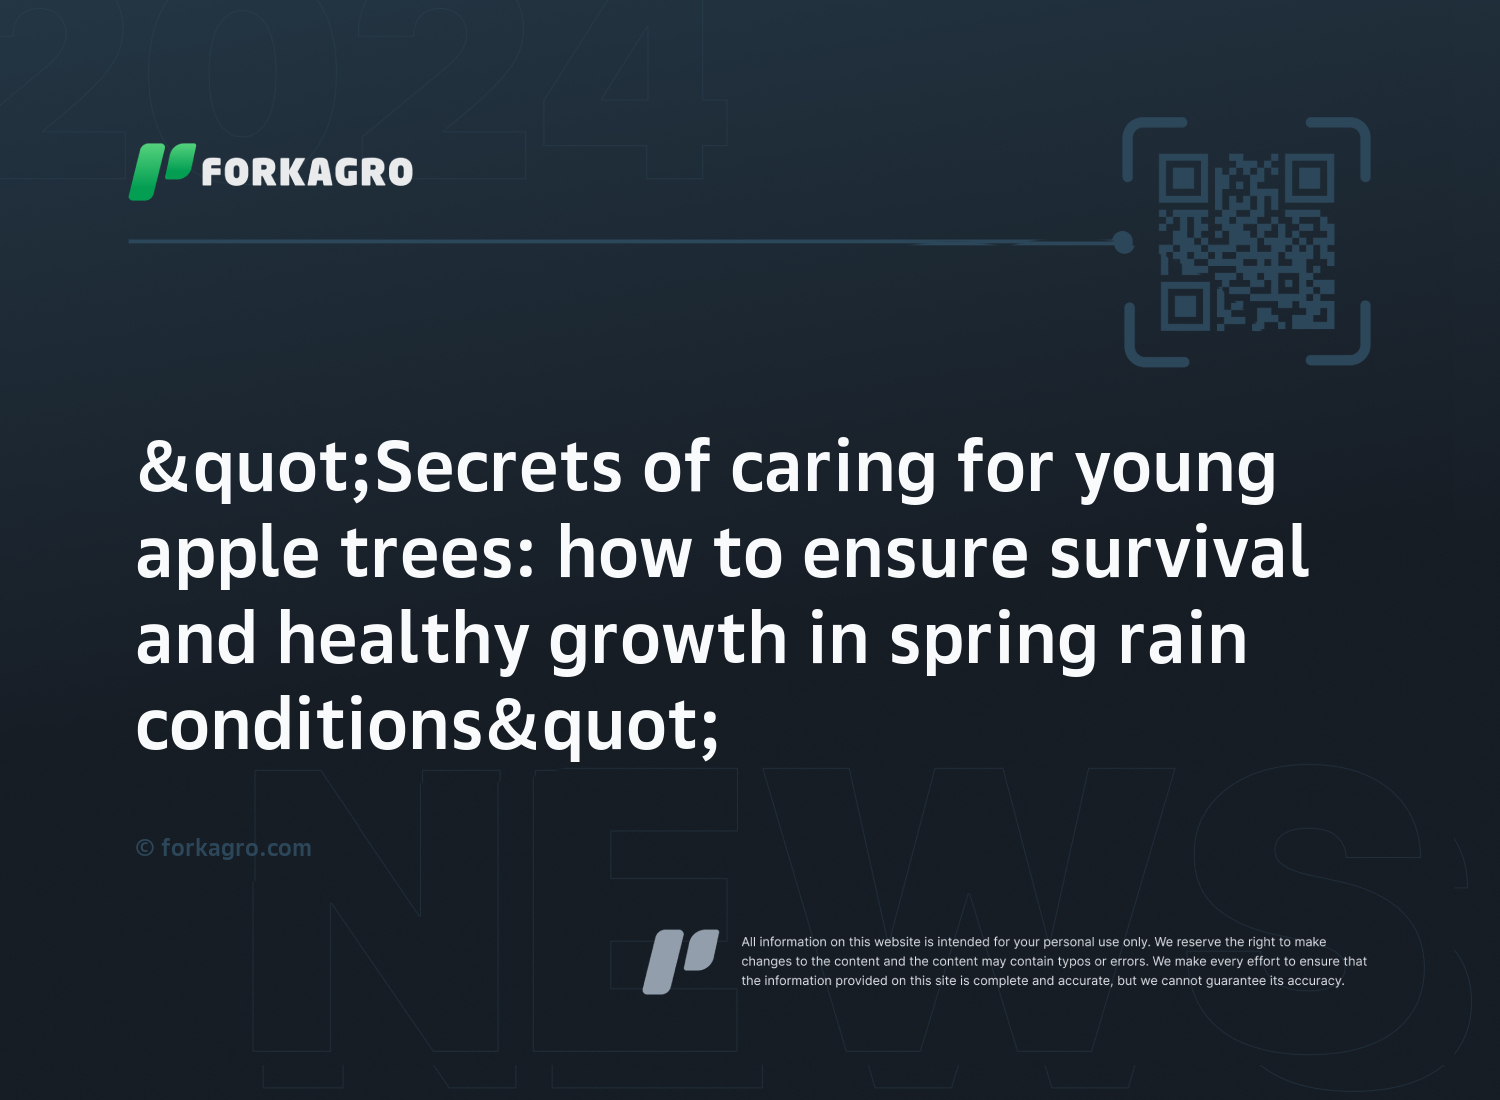 "Secrets of caring for young apple trees: how to ensure survival and healthy growth in spring rain conditions"